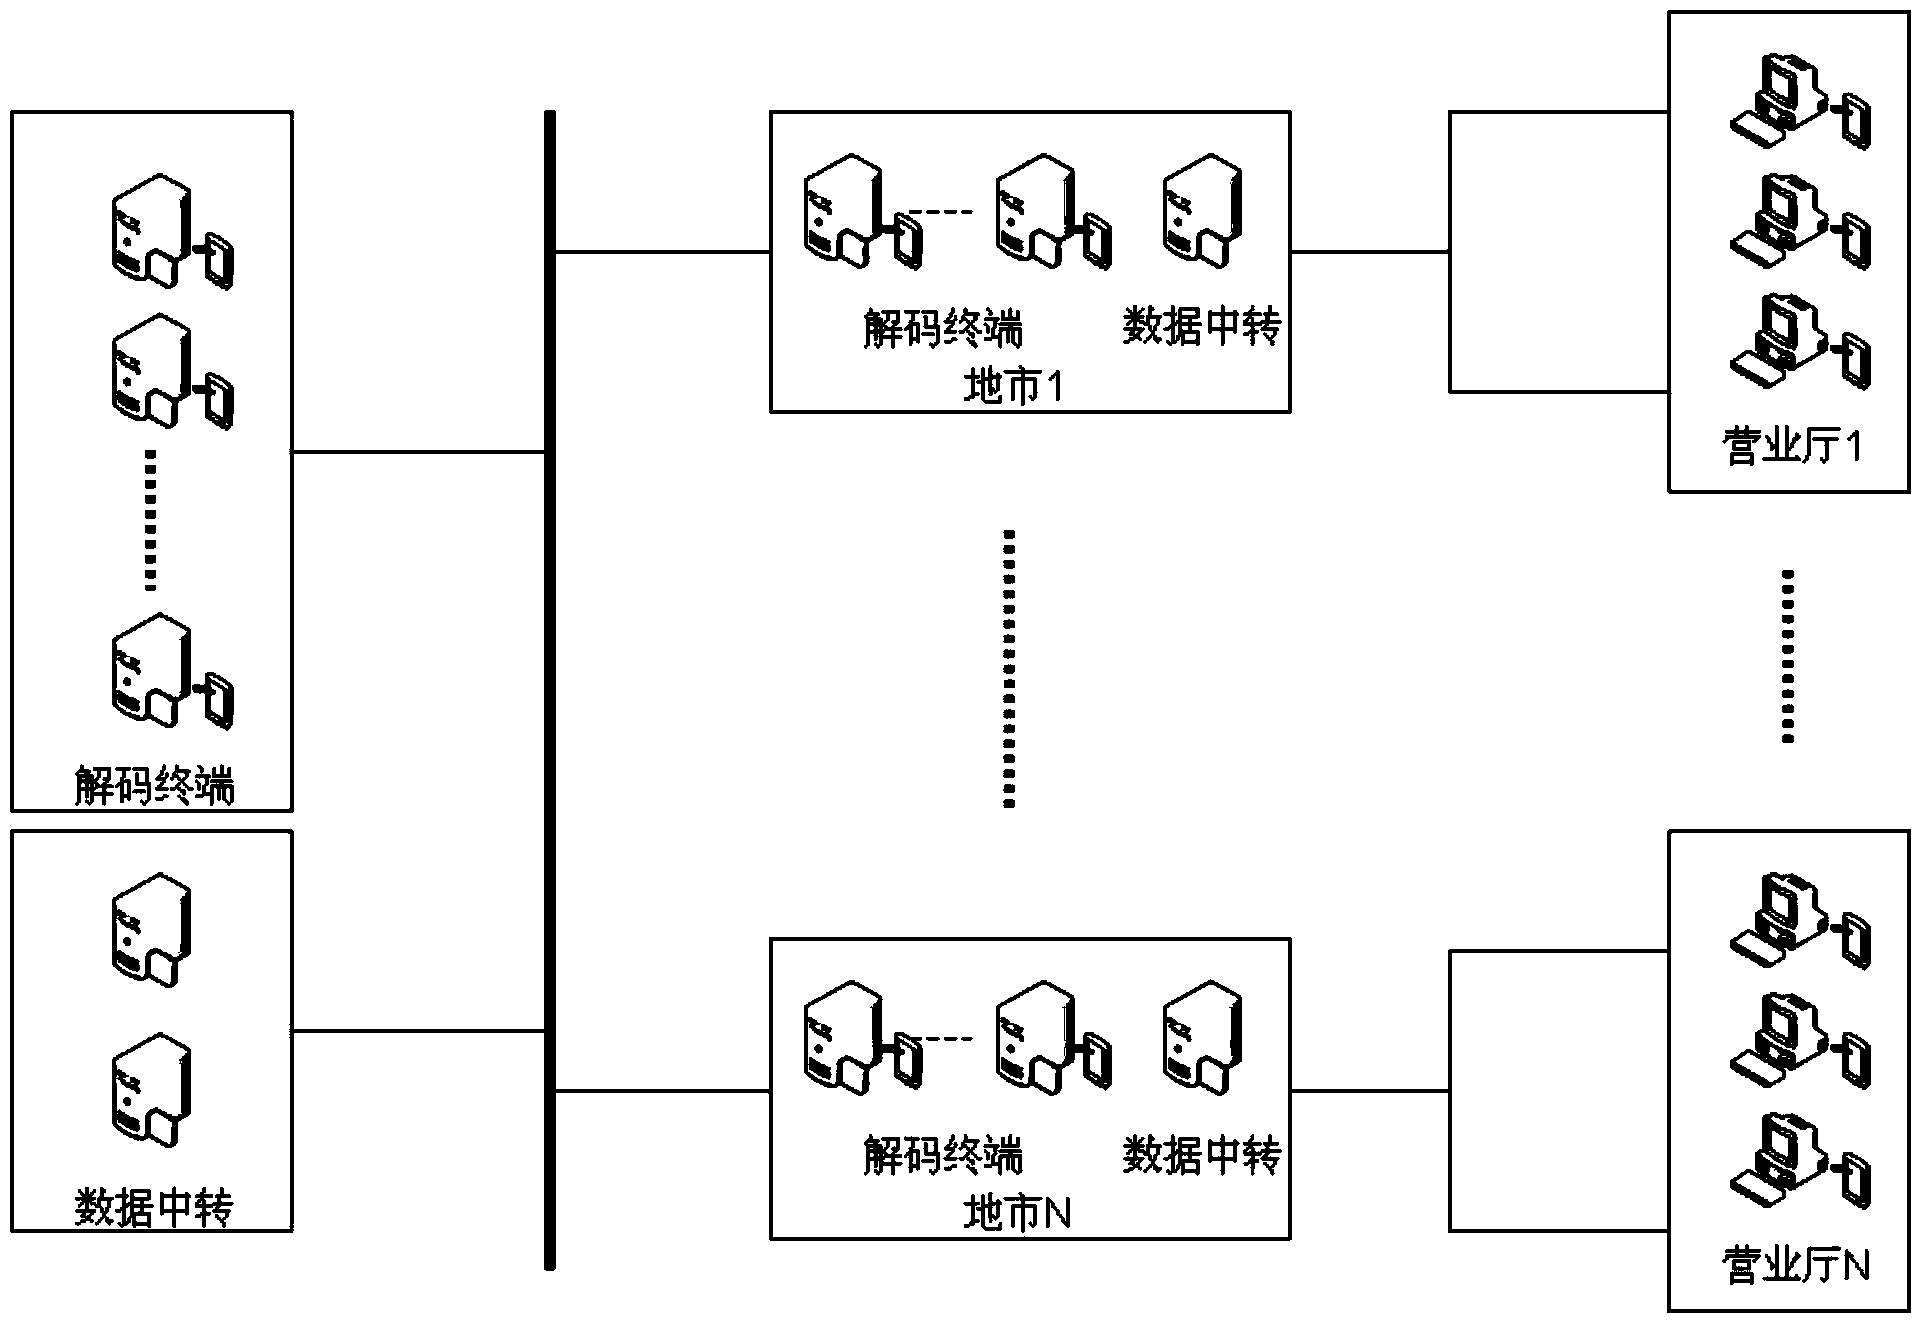 Network centralized decoding system and method of identity card identifier